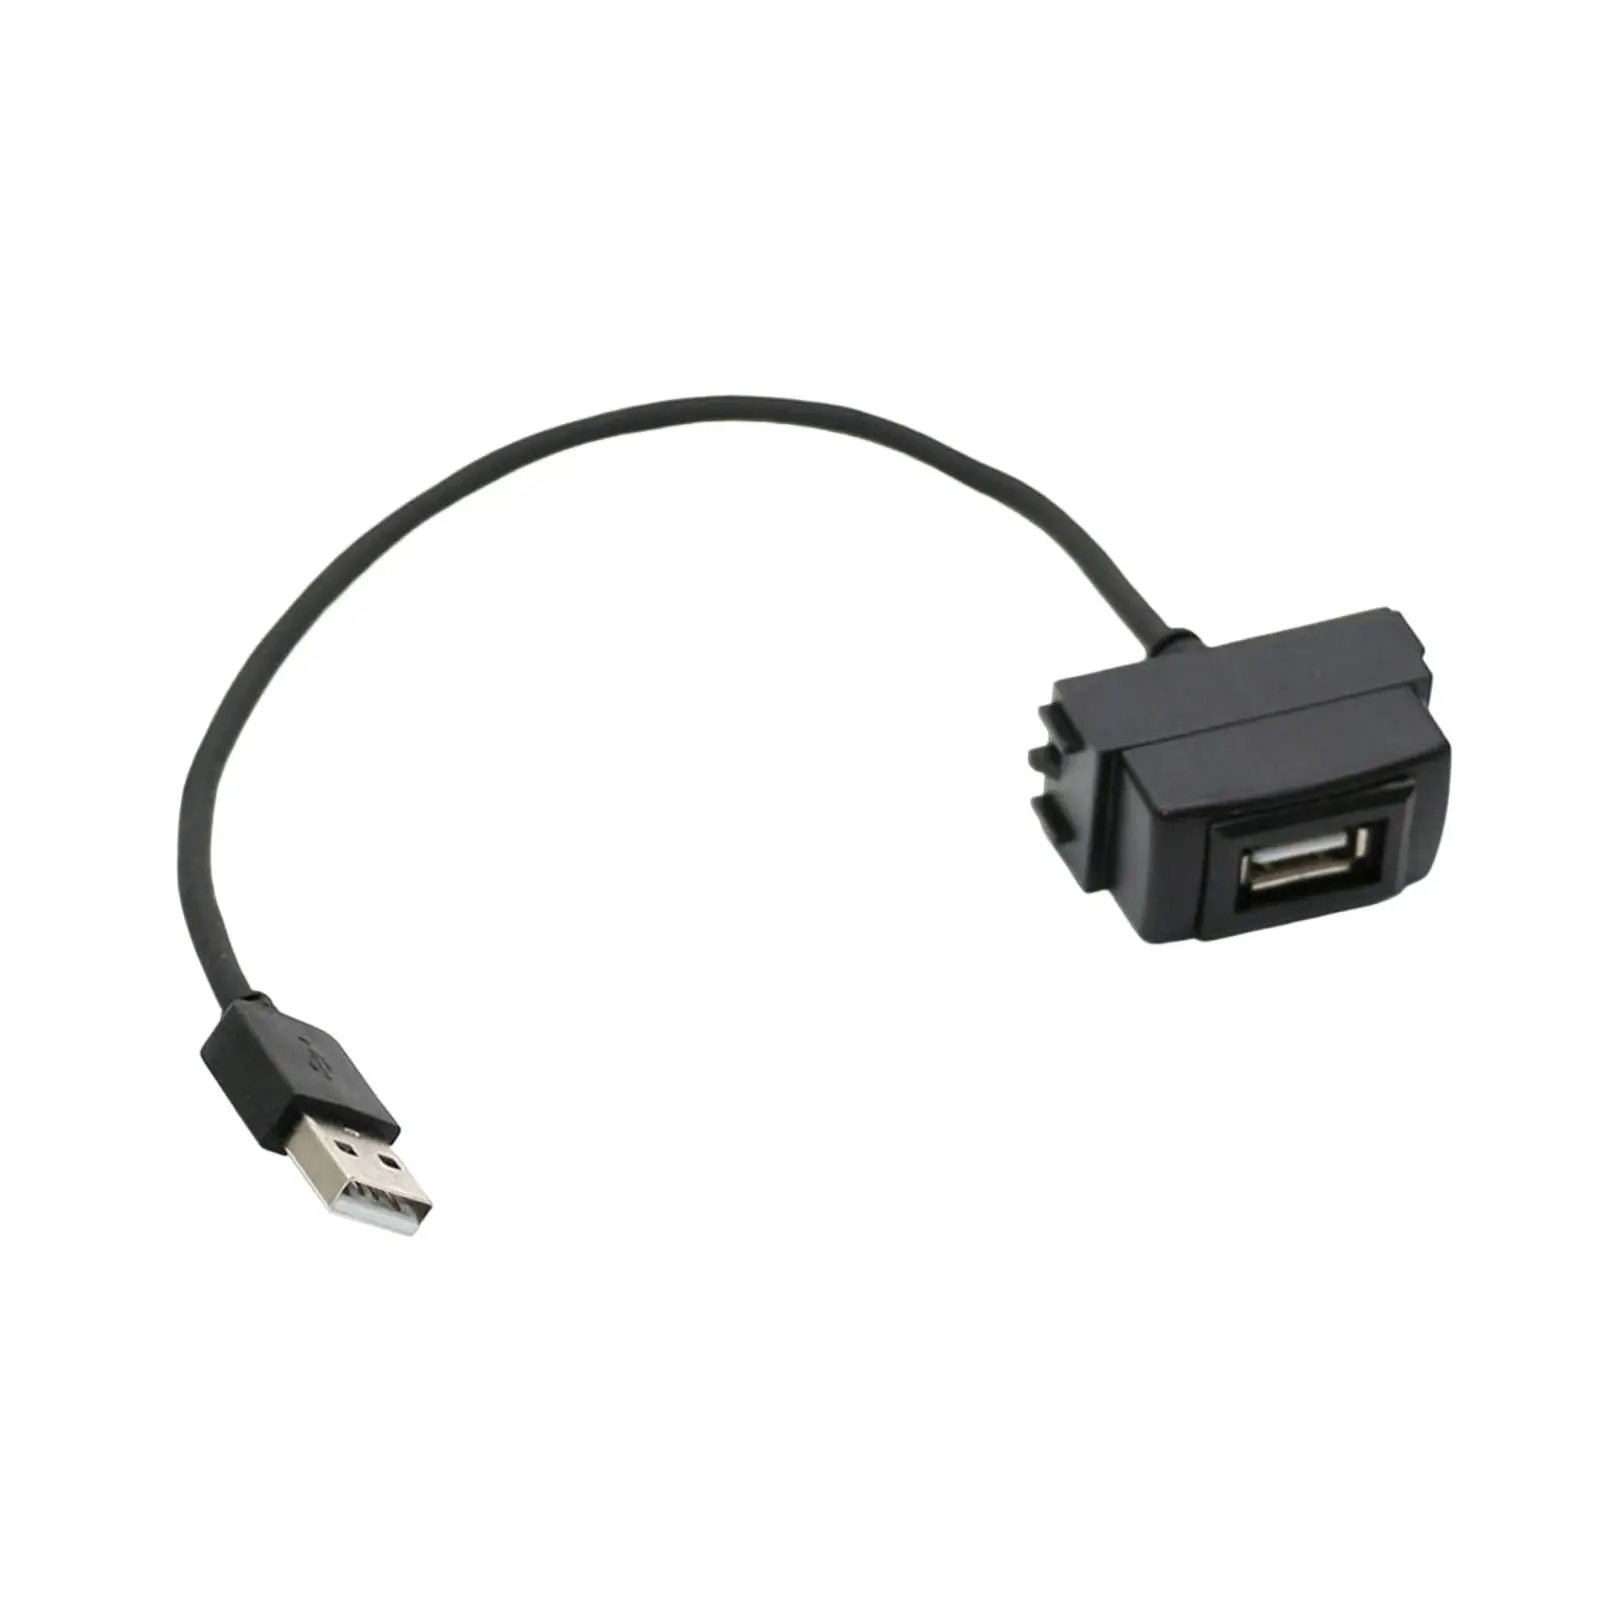 2 USB Extension Cable Data Transfer for March Spare Parts Direct Replaces